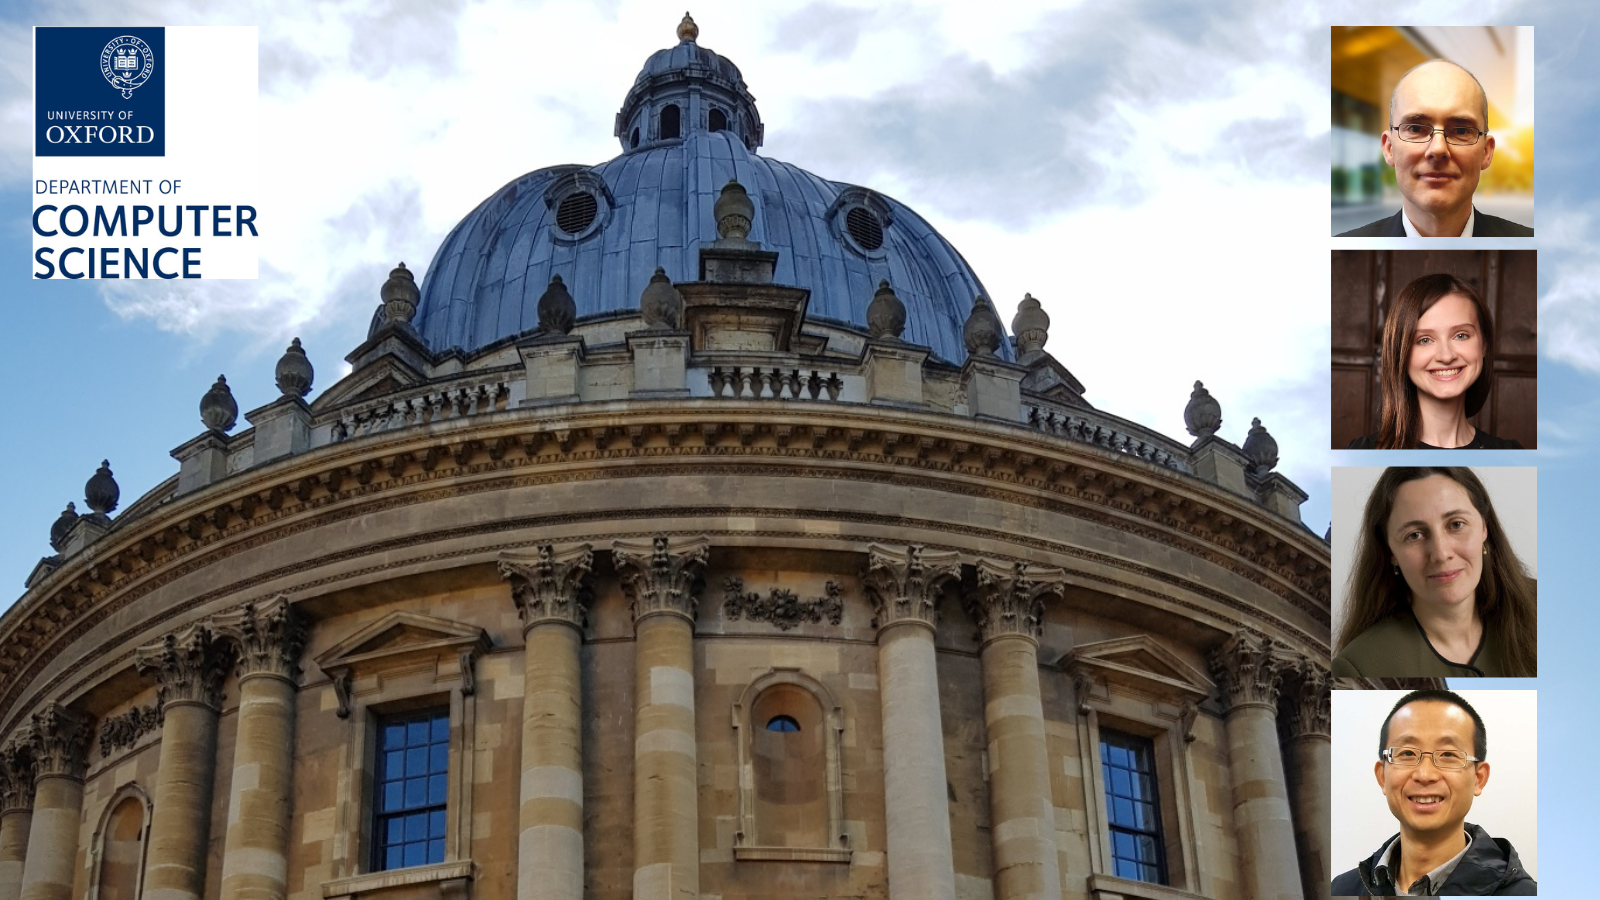 A building of the Oxford university.